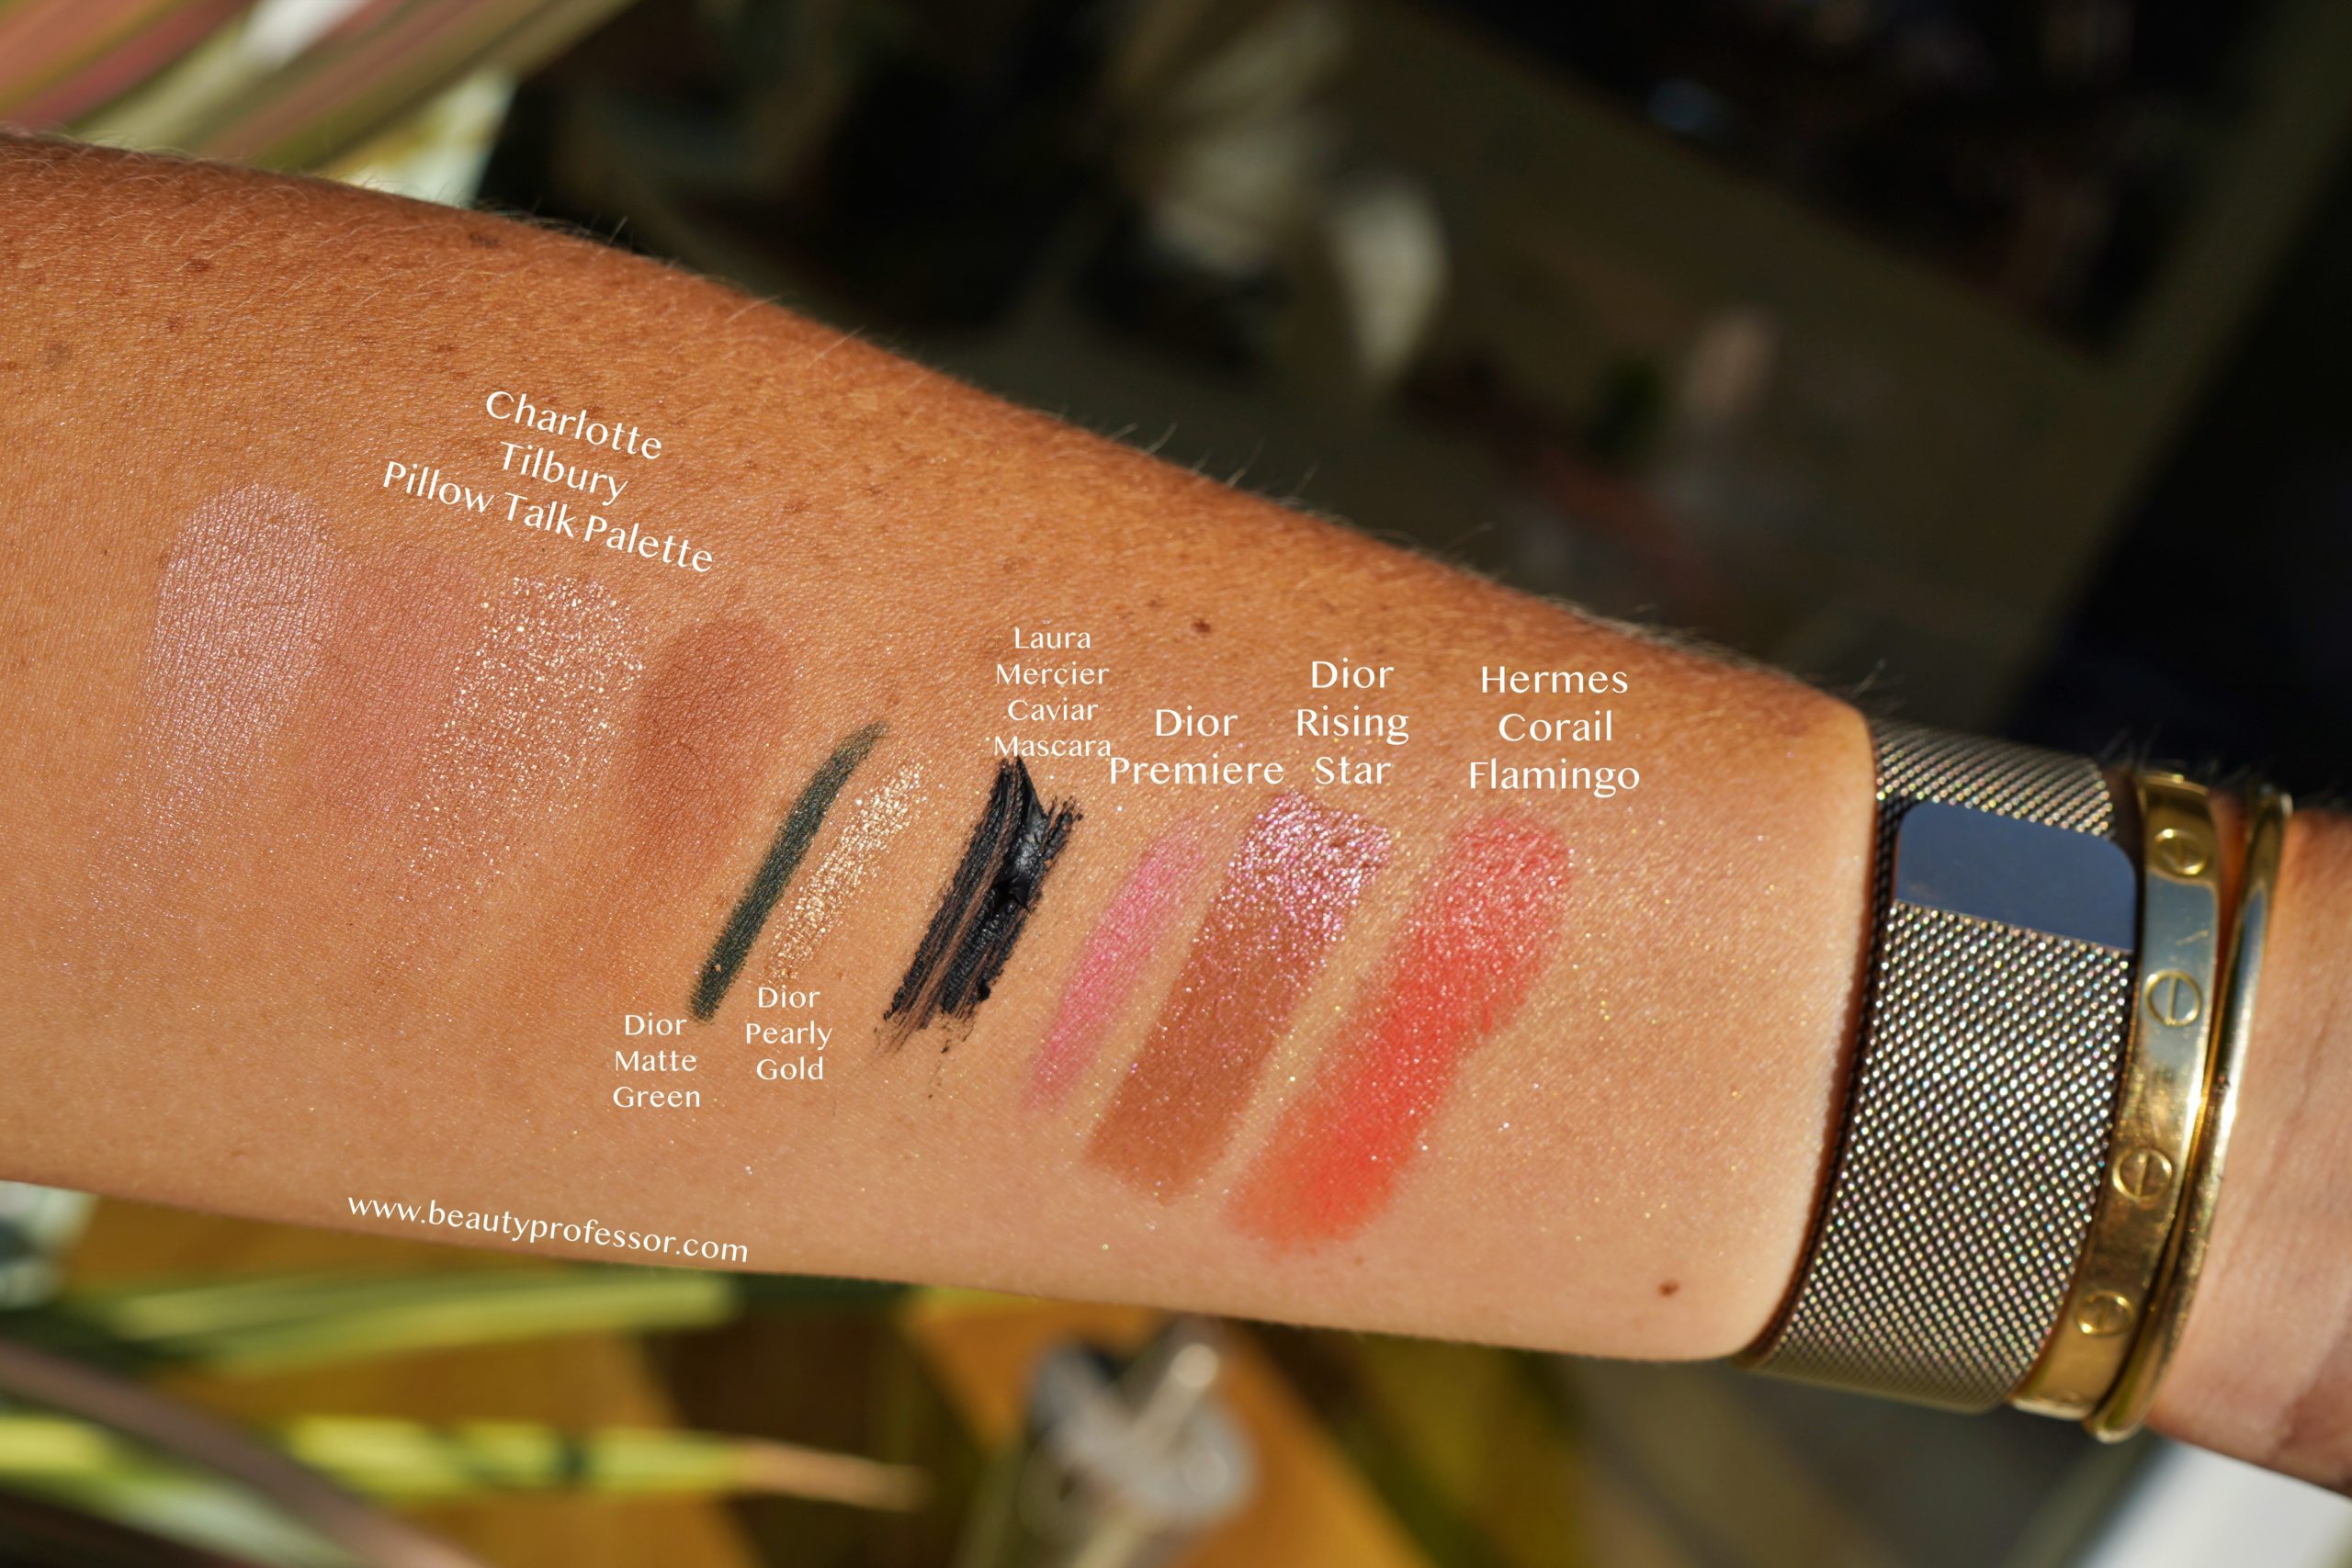 Eye and lip swatches in direct sunlight